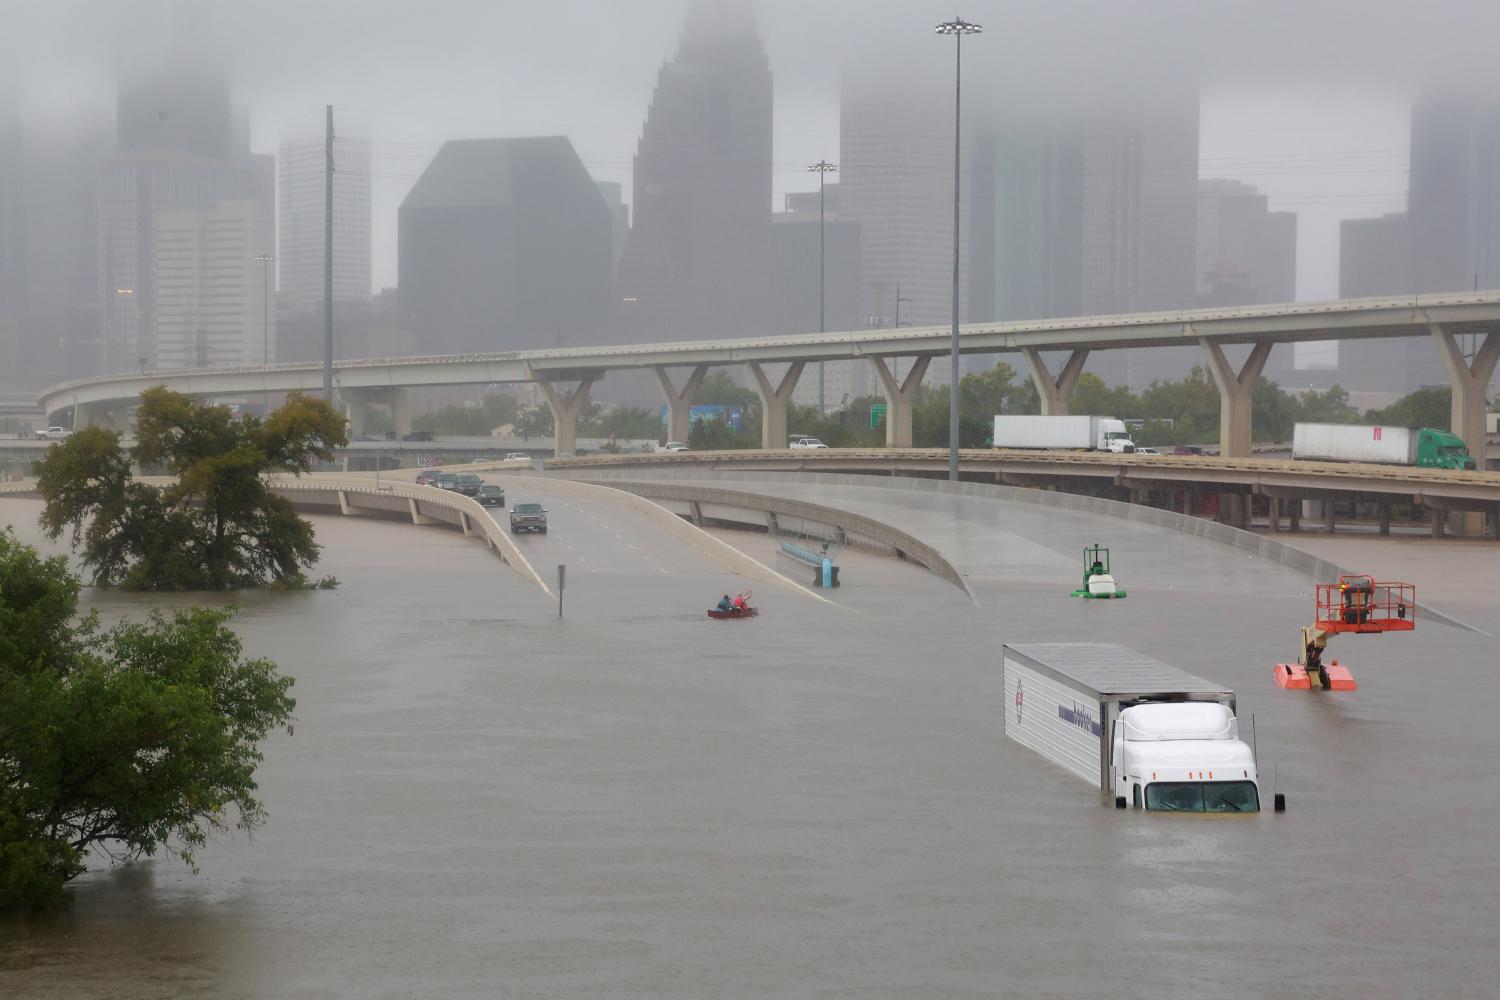 Interstate highway 45 is submerged from the effects of Hurricane Harvey seen during widespread flooding in Houston, Texas.